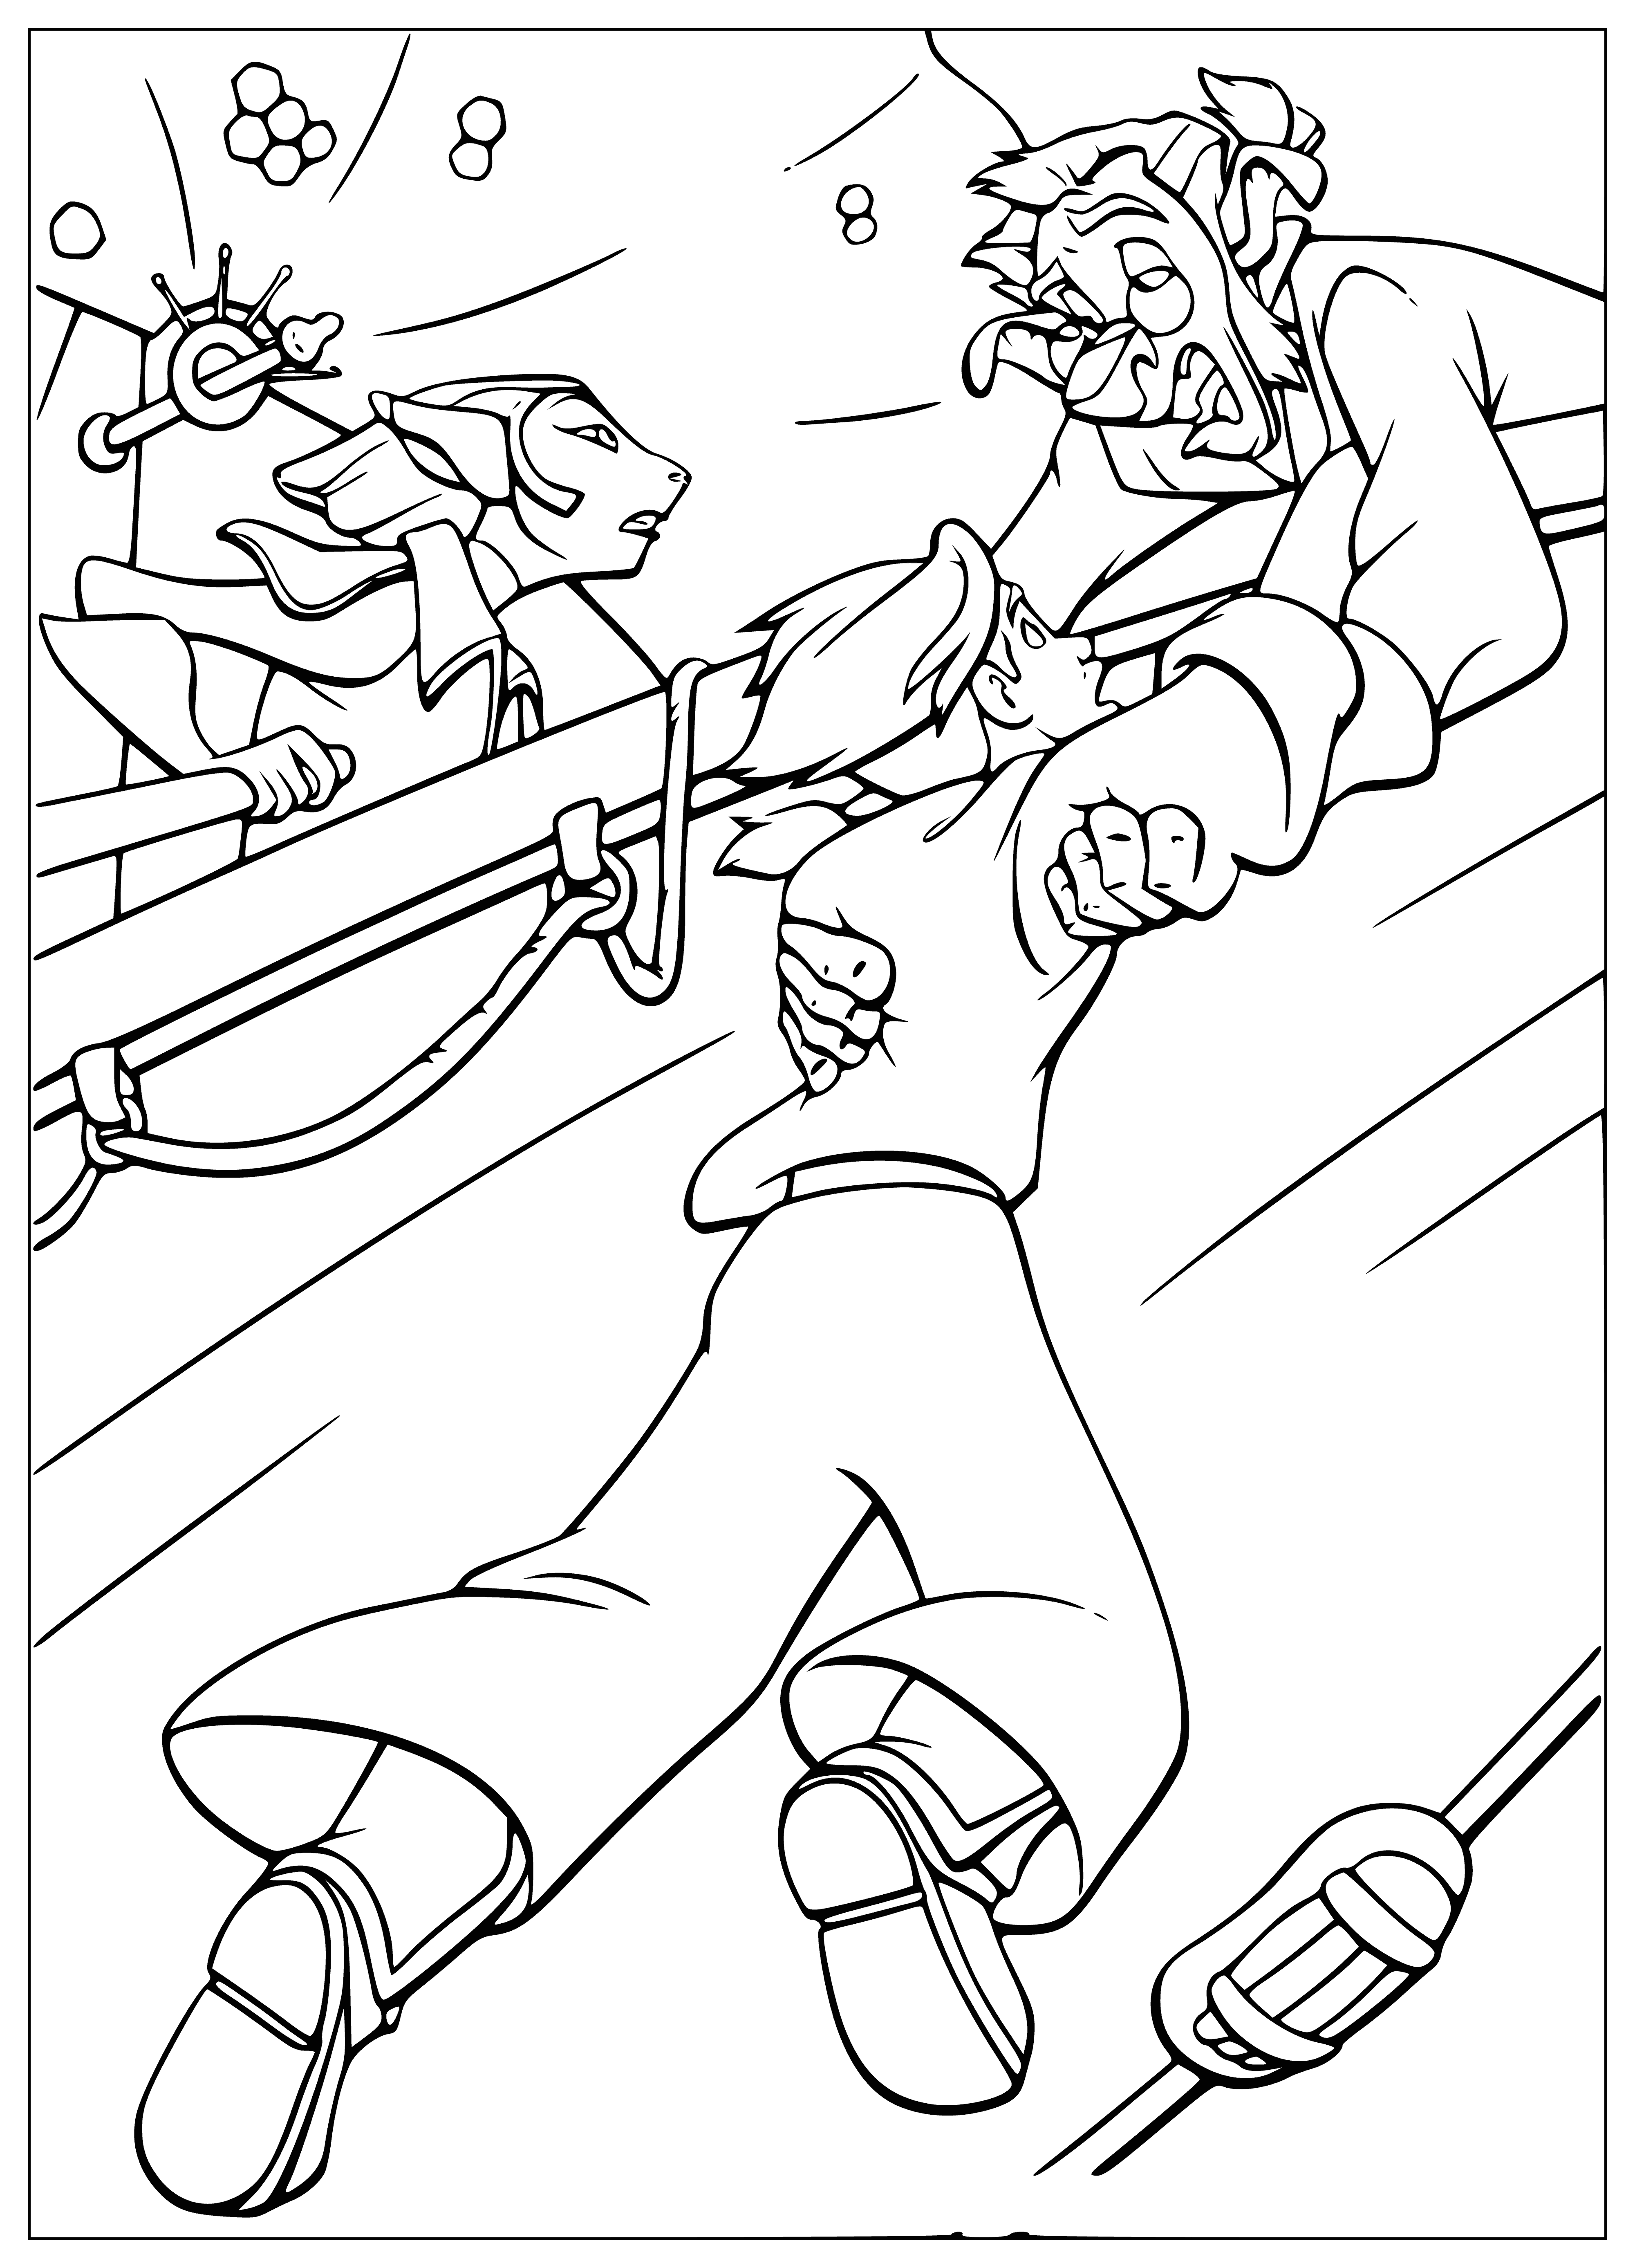 Jim nearly fell coloring page